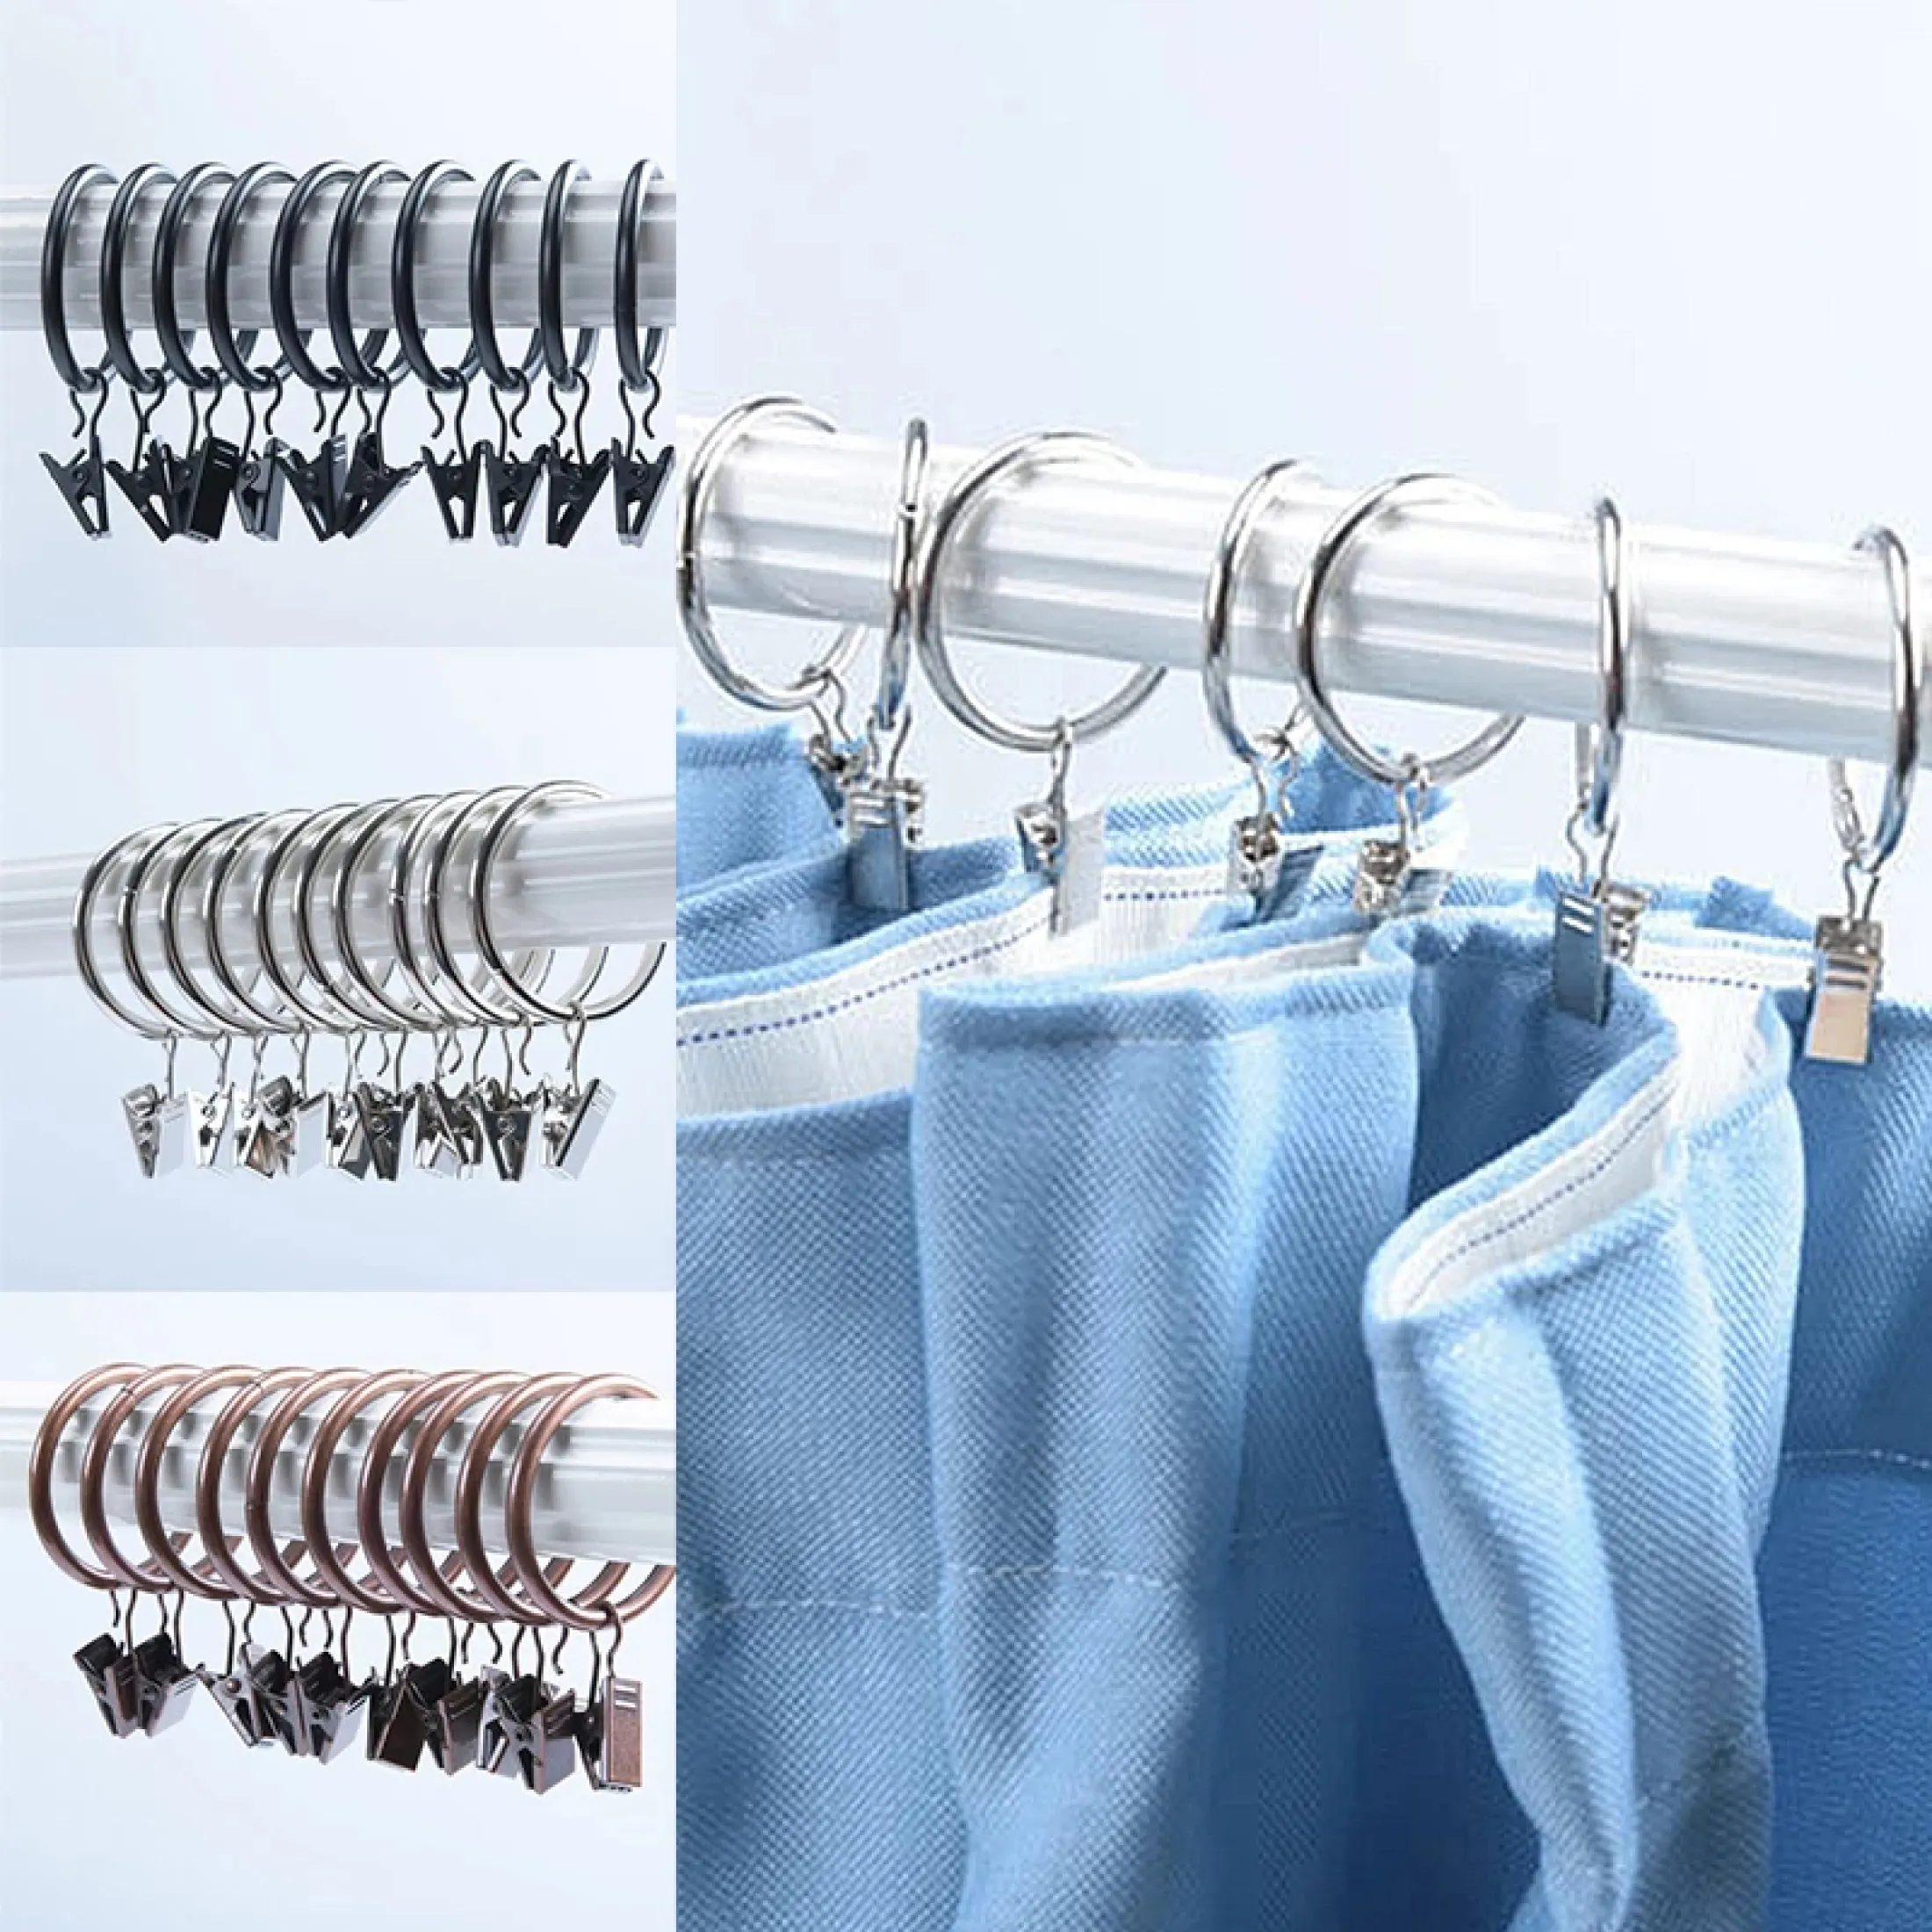 10pcs Shower Curtain Rings With Clips, Heavy Duty Shower Curtain Rings